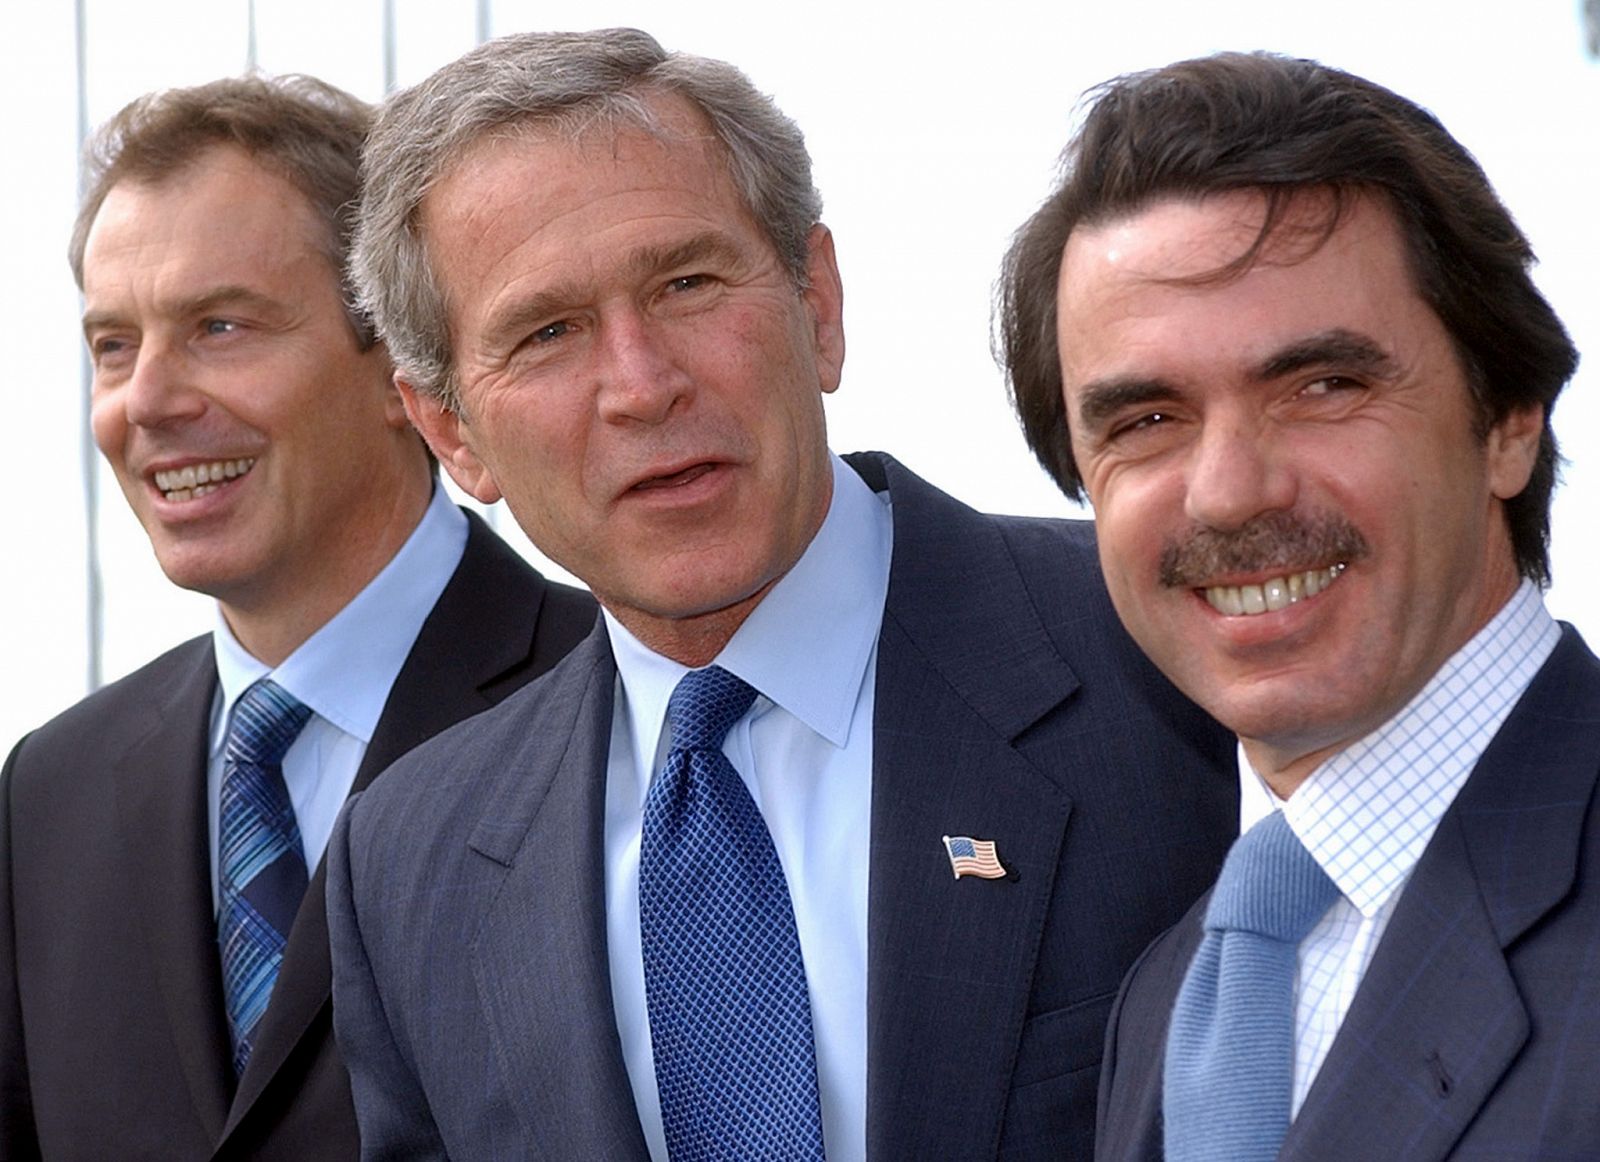 PRIME MINISTERS BLAIR AND AZNAR MEET U.S. PRESIDENT BUSH IN THE AZORES